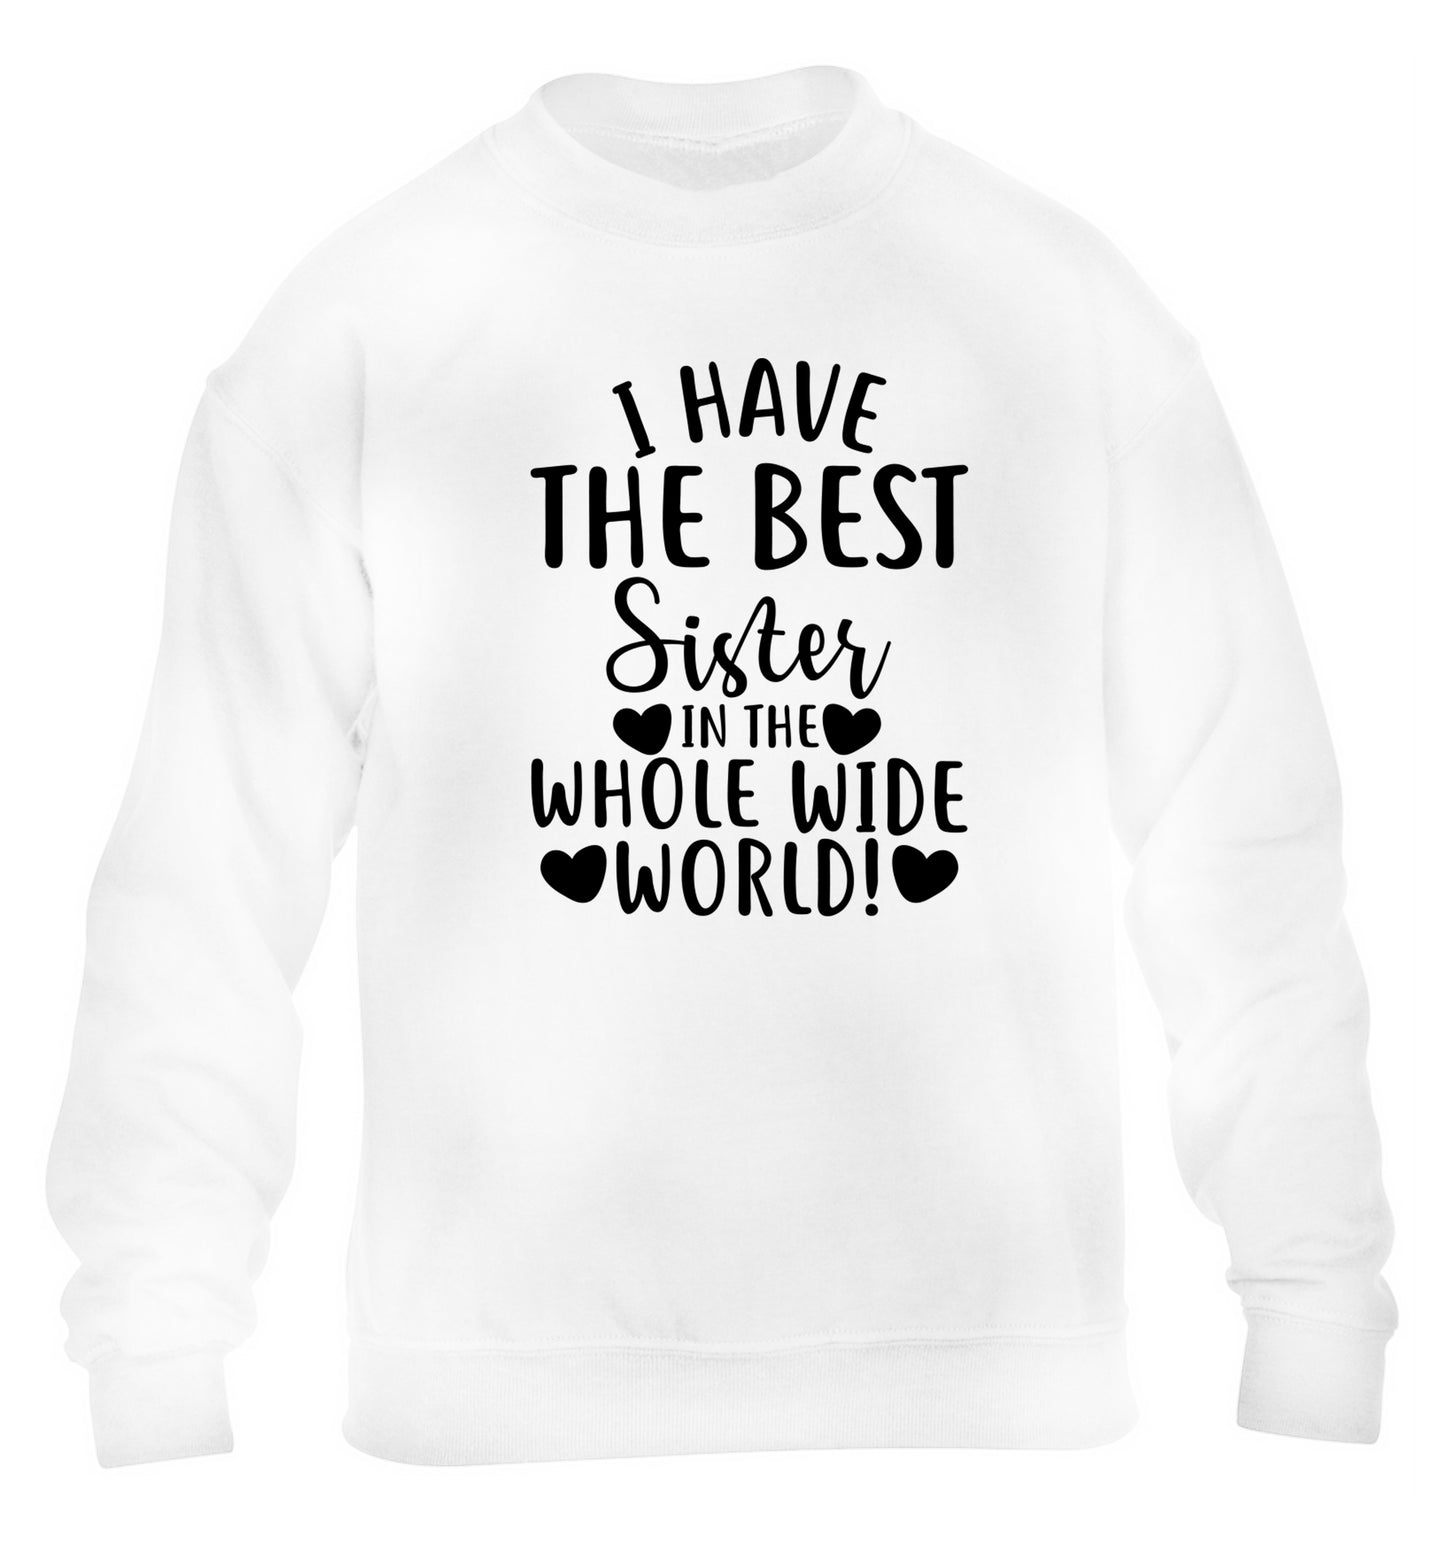 I have the best sister in the whole wide world! children's white sweater 12-13 Years